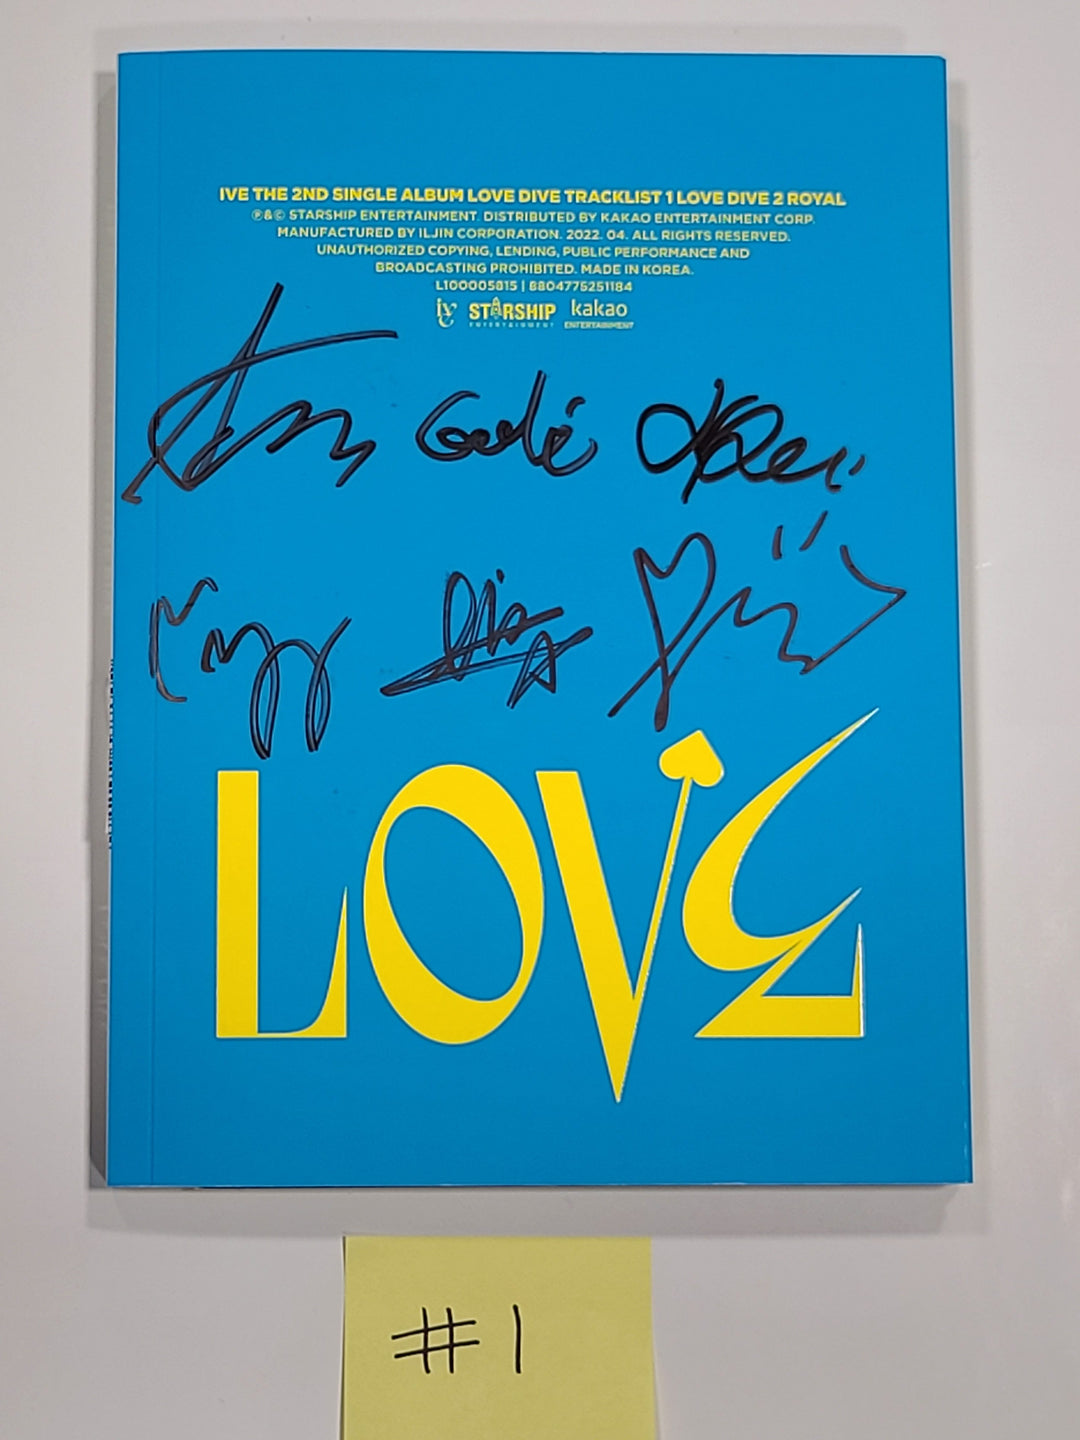 IVE ‘LOVE DIVE’ 2nd Single - Hand Autographed(Signed) Promo Album